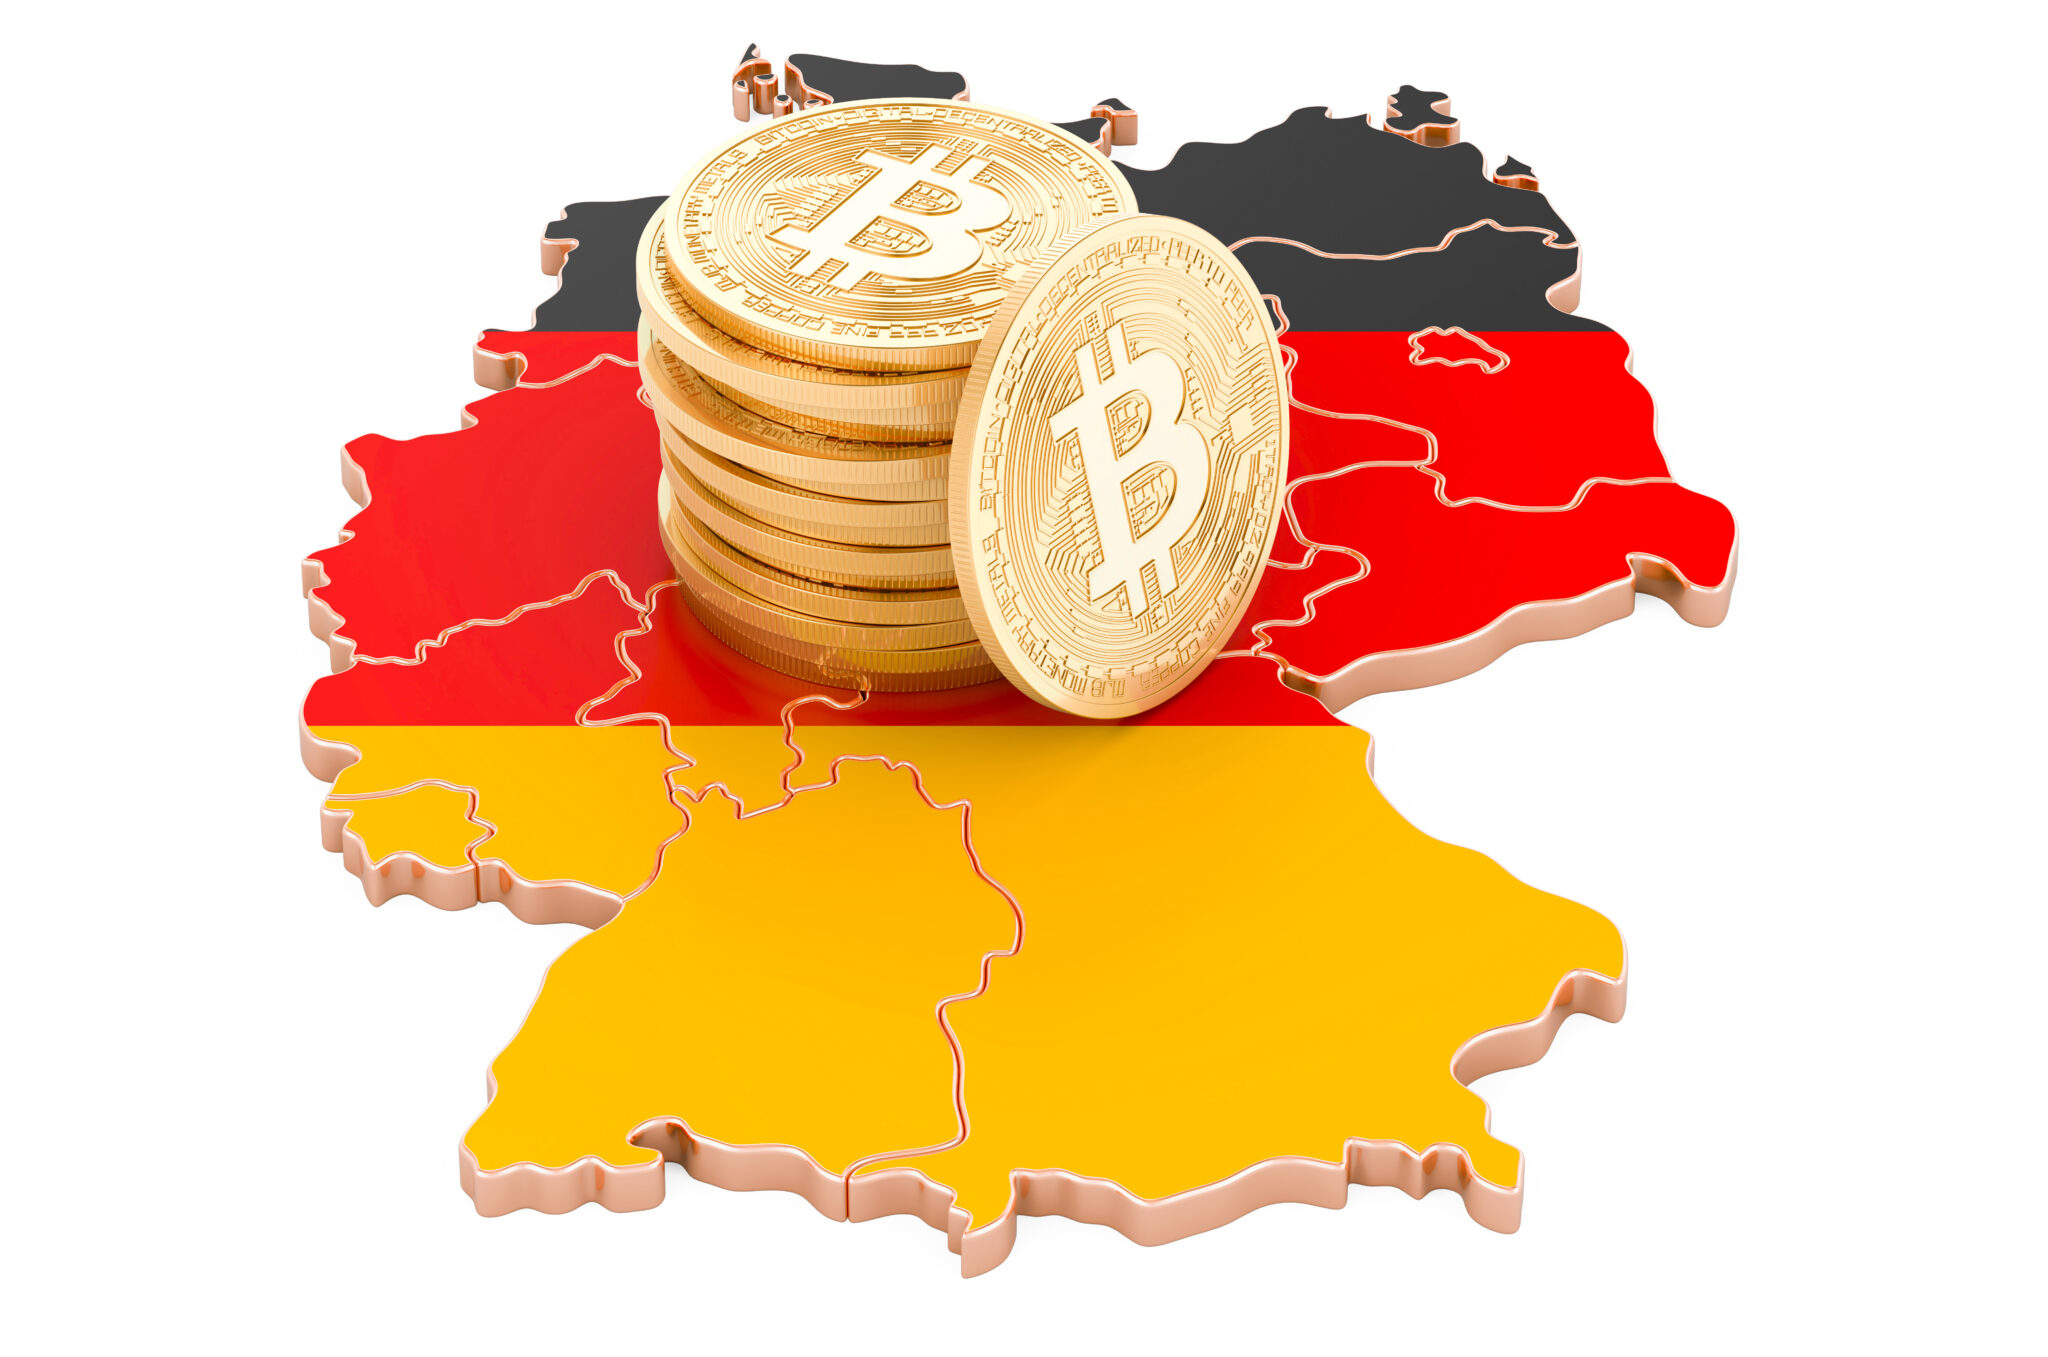 Bitcoin cryptocurrency in Germany, 3D rendering isolated on white background